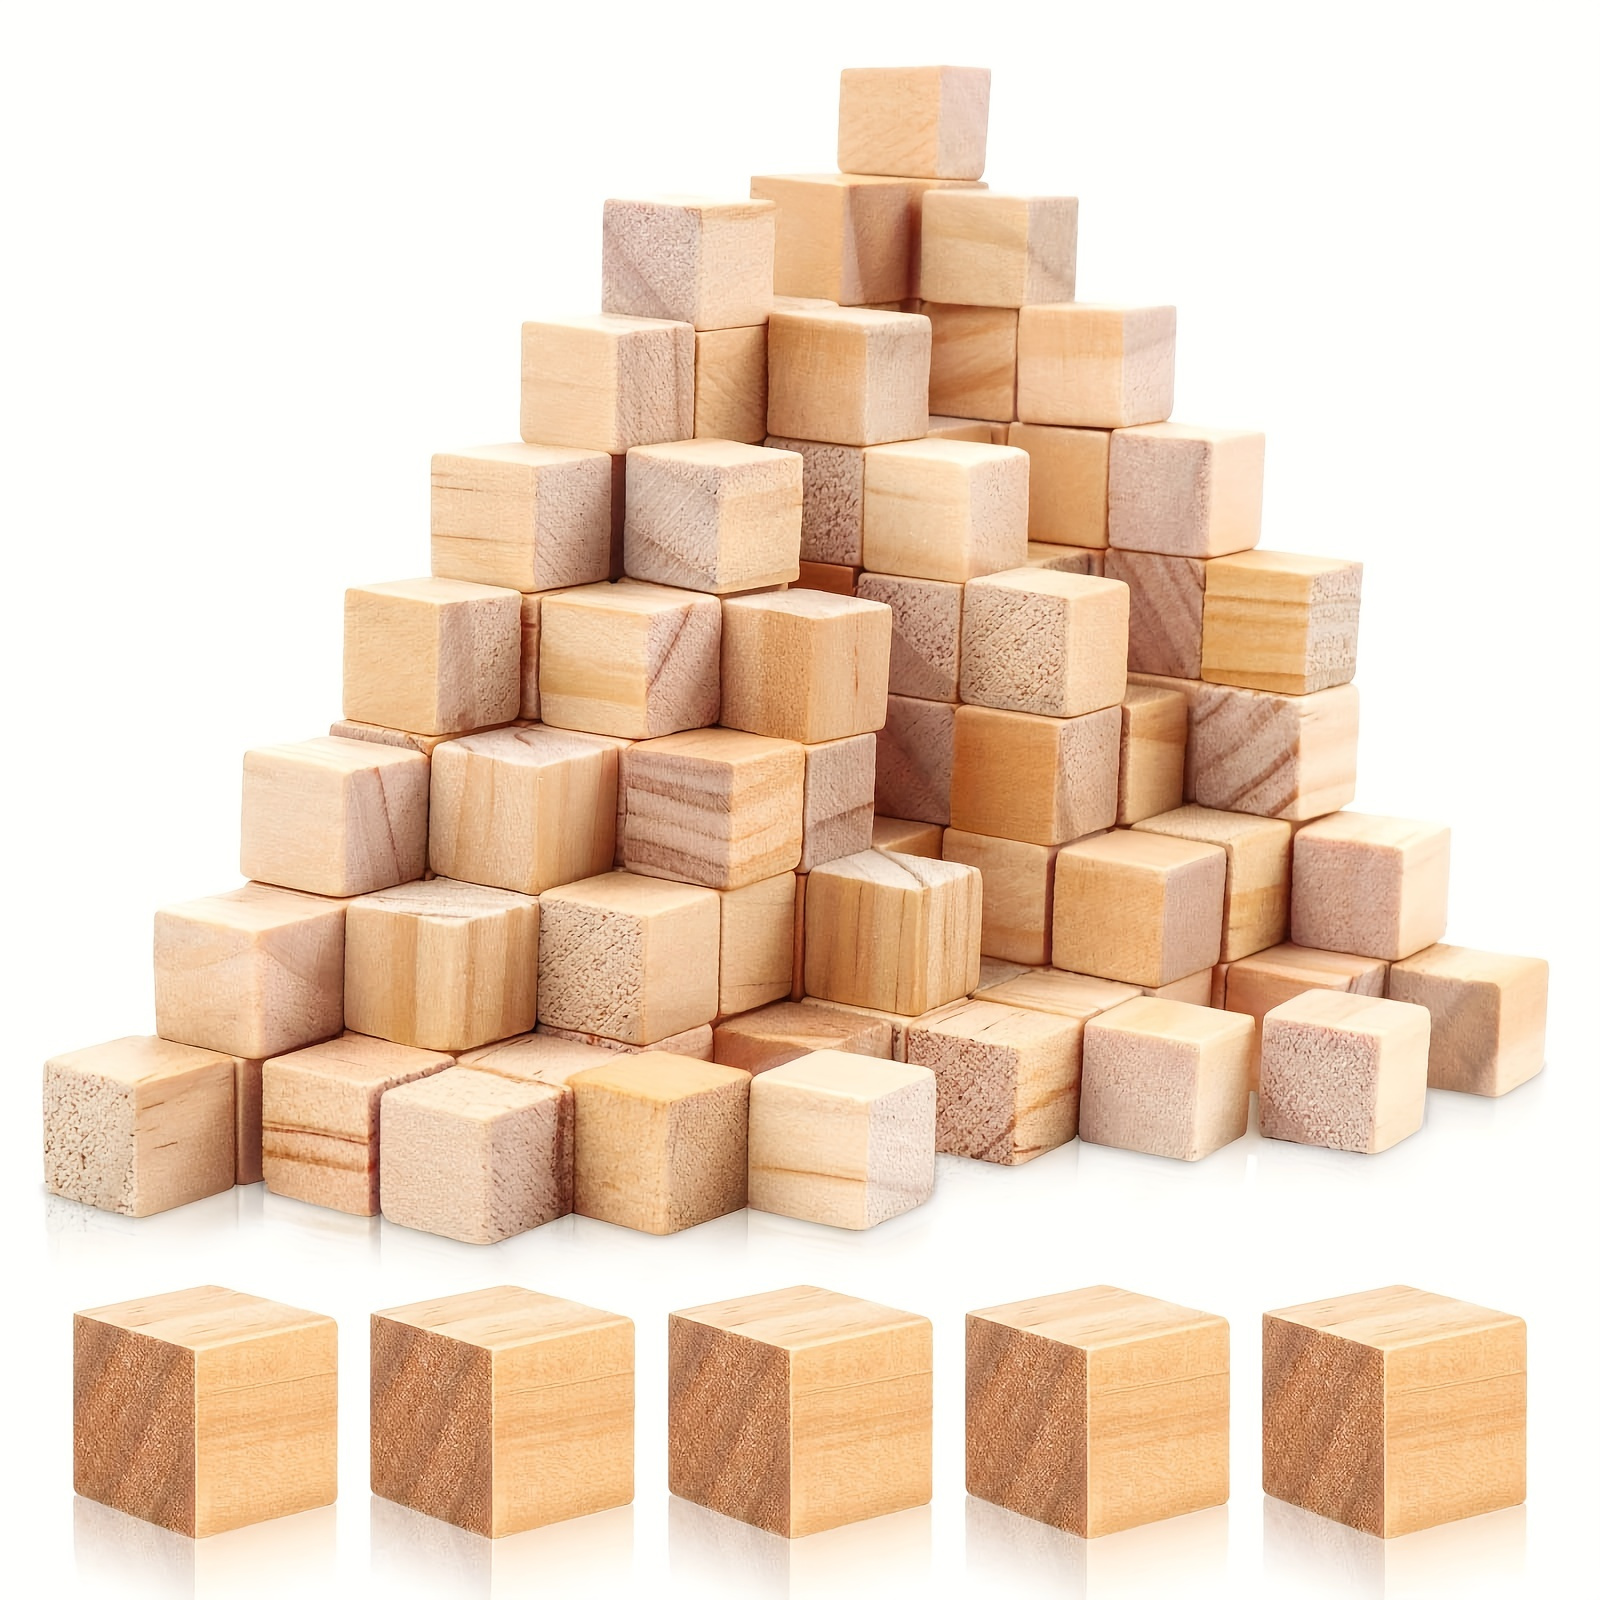 Oungy 16PCS Wood Carving Blocks 6 x 1.5 x 1.5 Inch Unfinished Basswood  Carving Blocks Carving Wood Blocks Wooden Carving Blocks Cubes for Carving